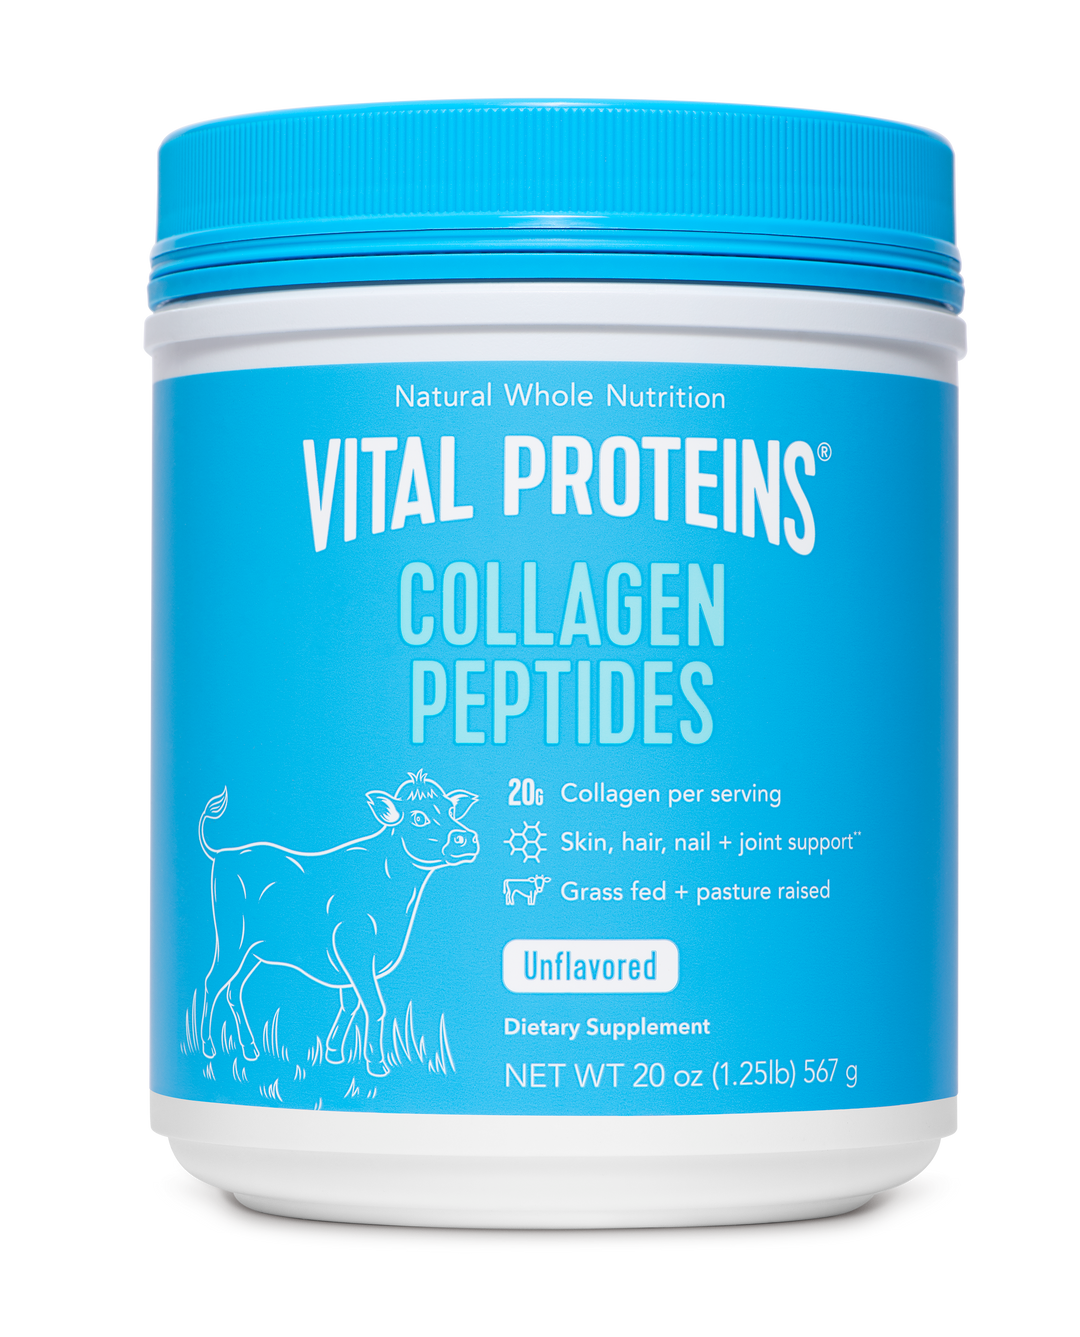 Vital Proteins Collagen Peptides Canister-20 oz.-6/Case